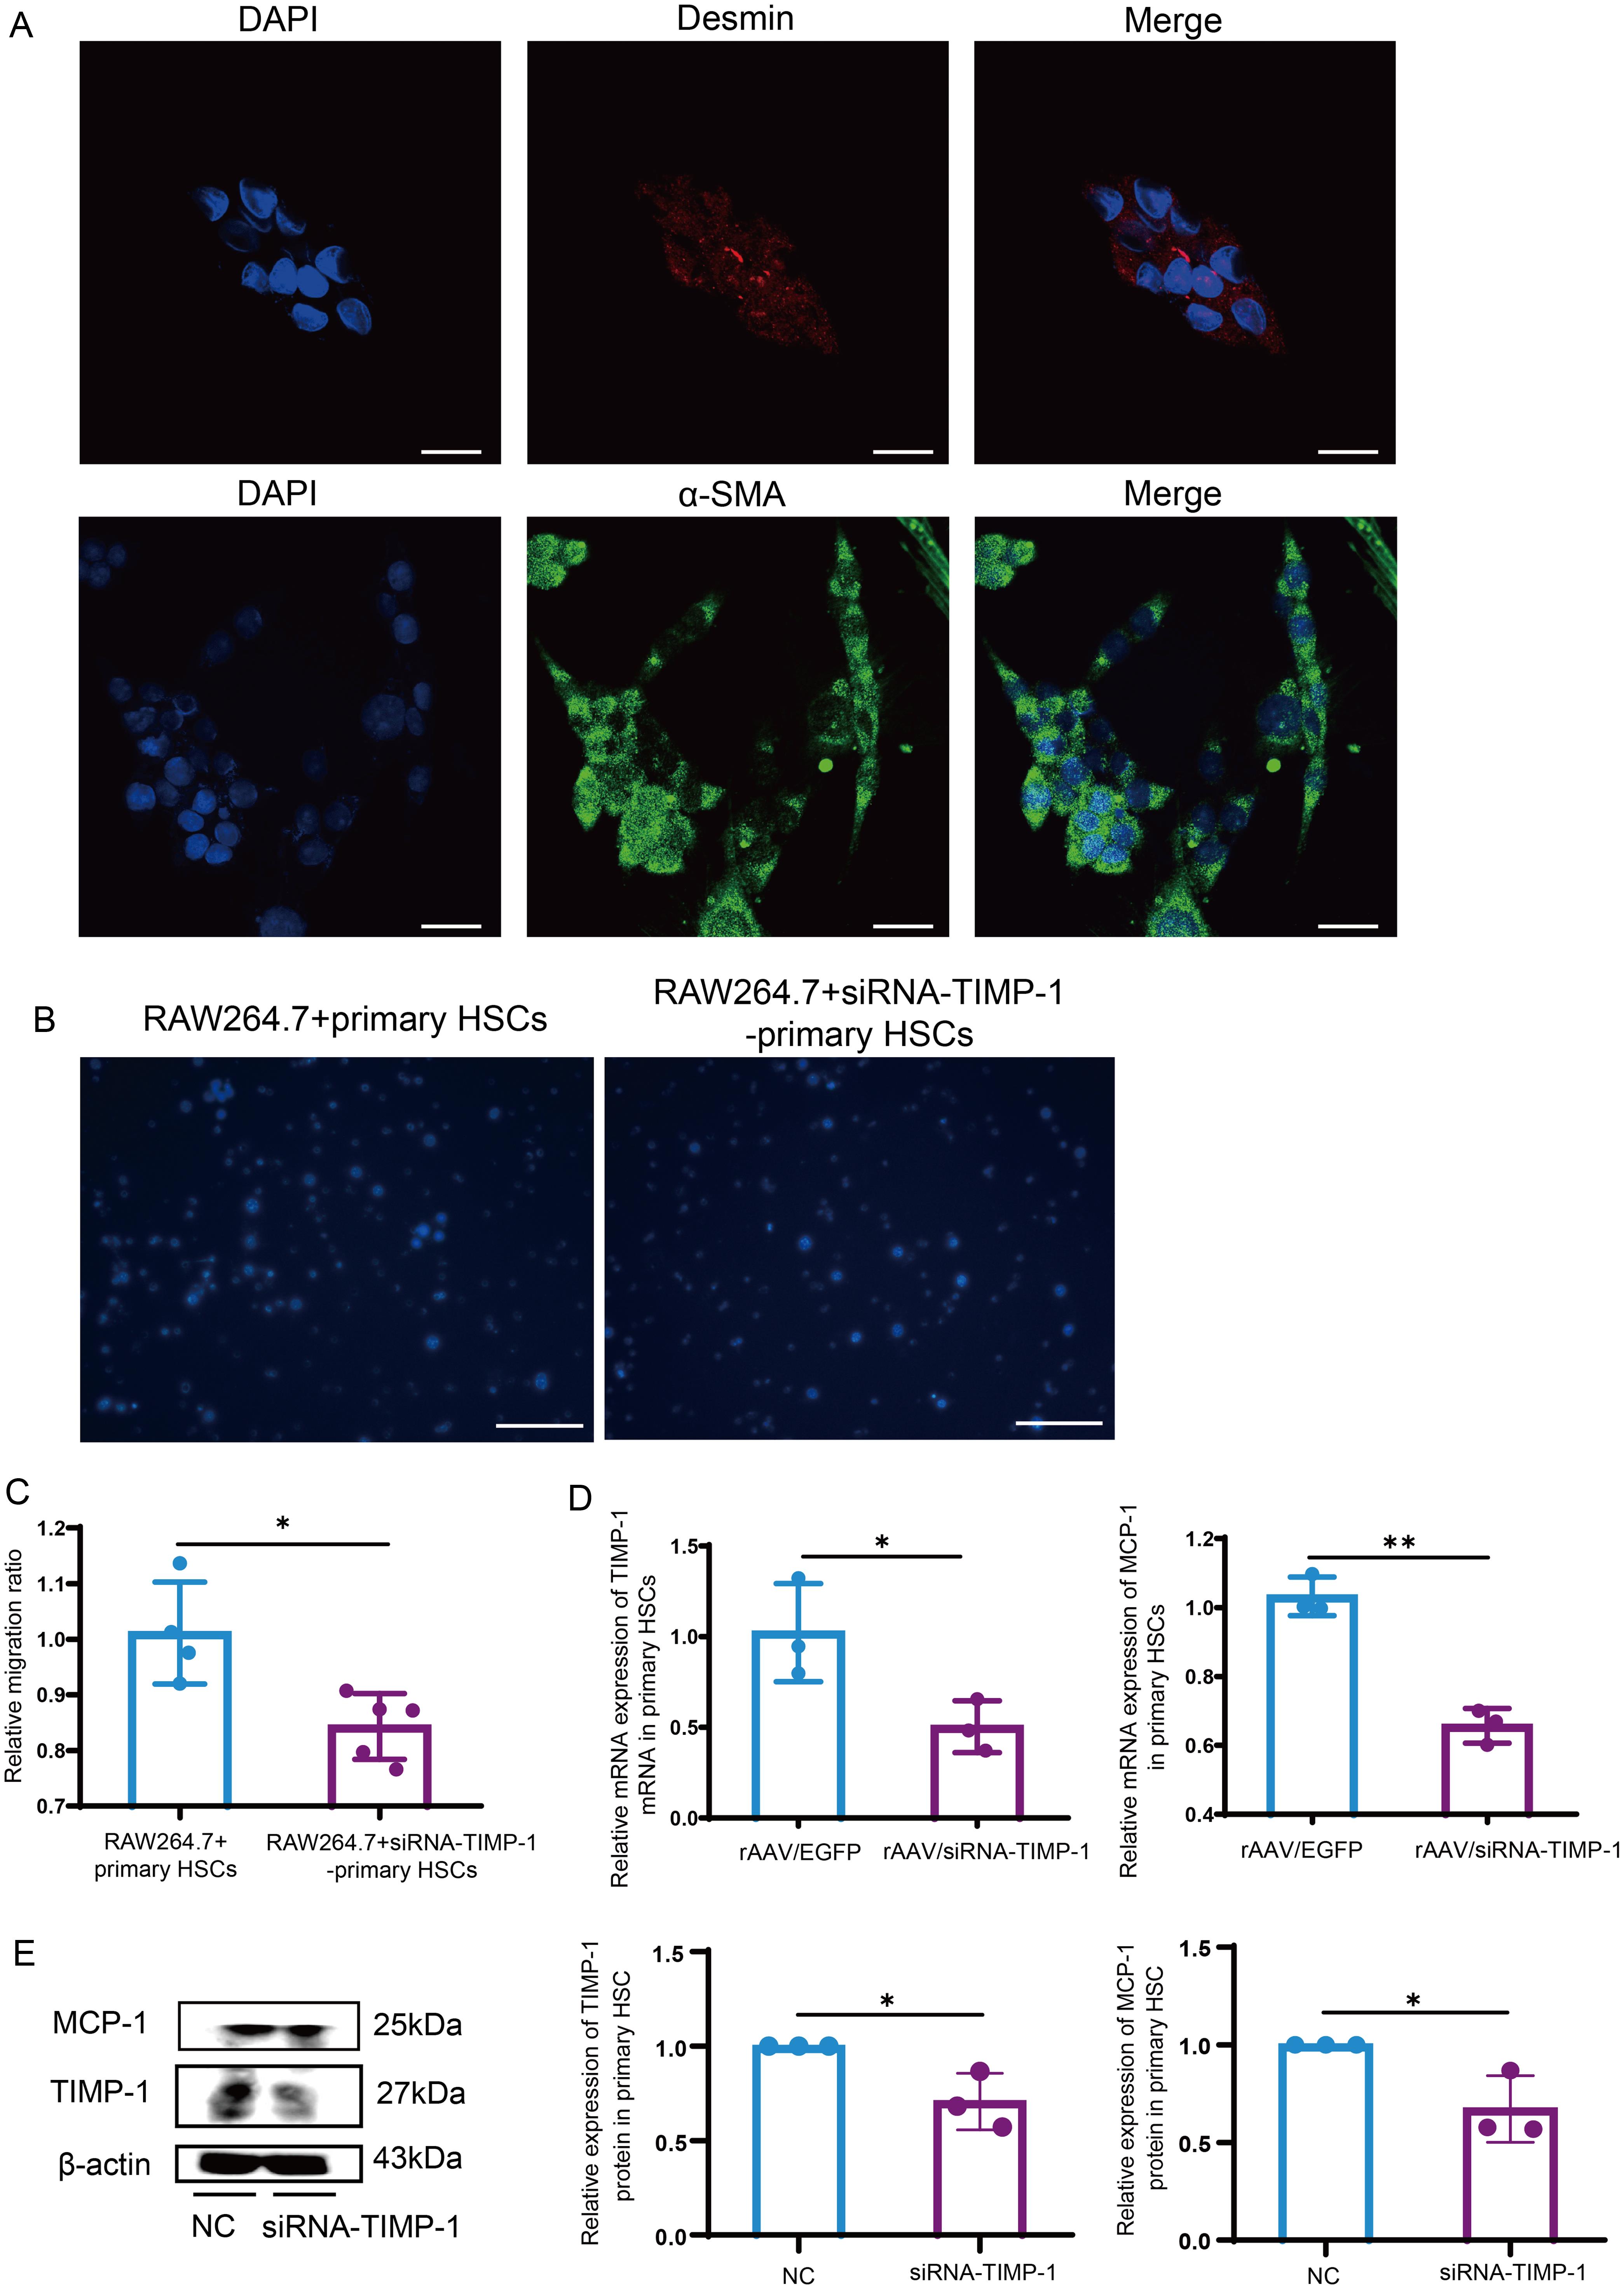 Downregulation of TIMP-1 in primary HSCs from mice suppresses the macrophage migration and inhibits MCP-1 expression.